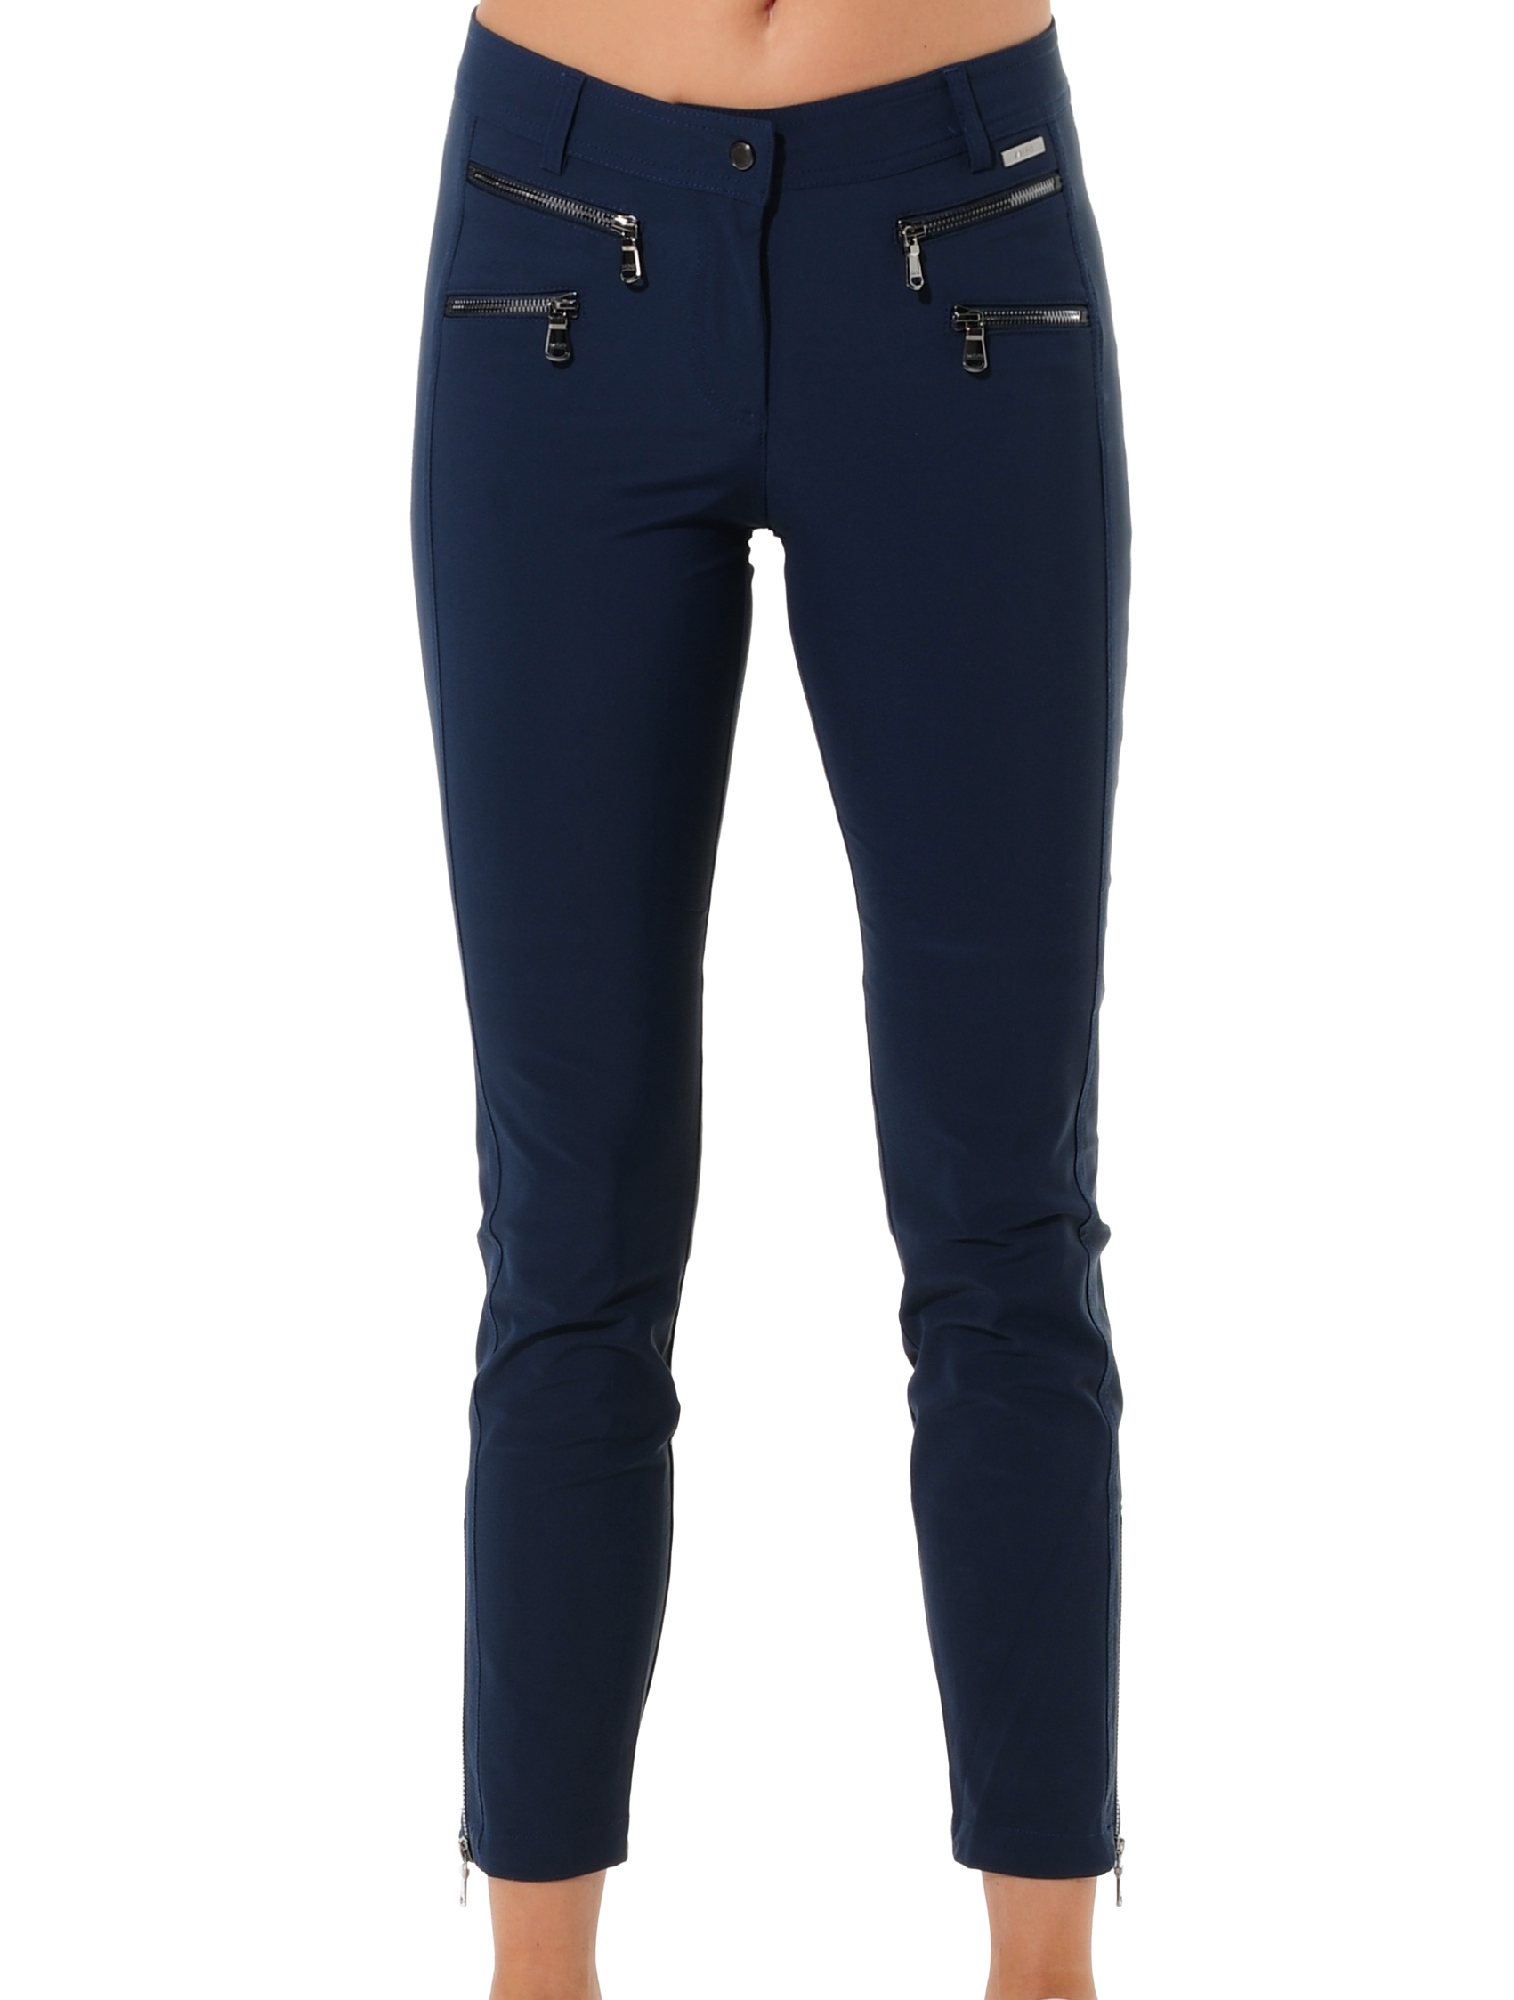 4way stretch double zip ankle pants navy 